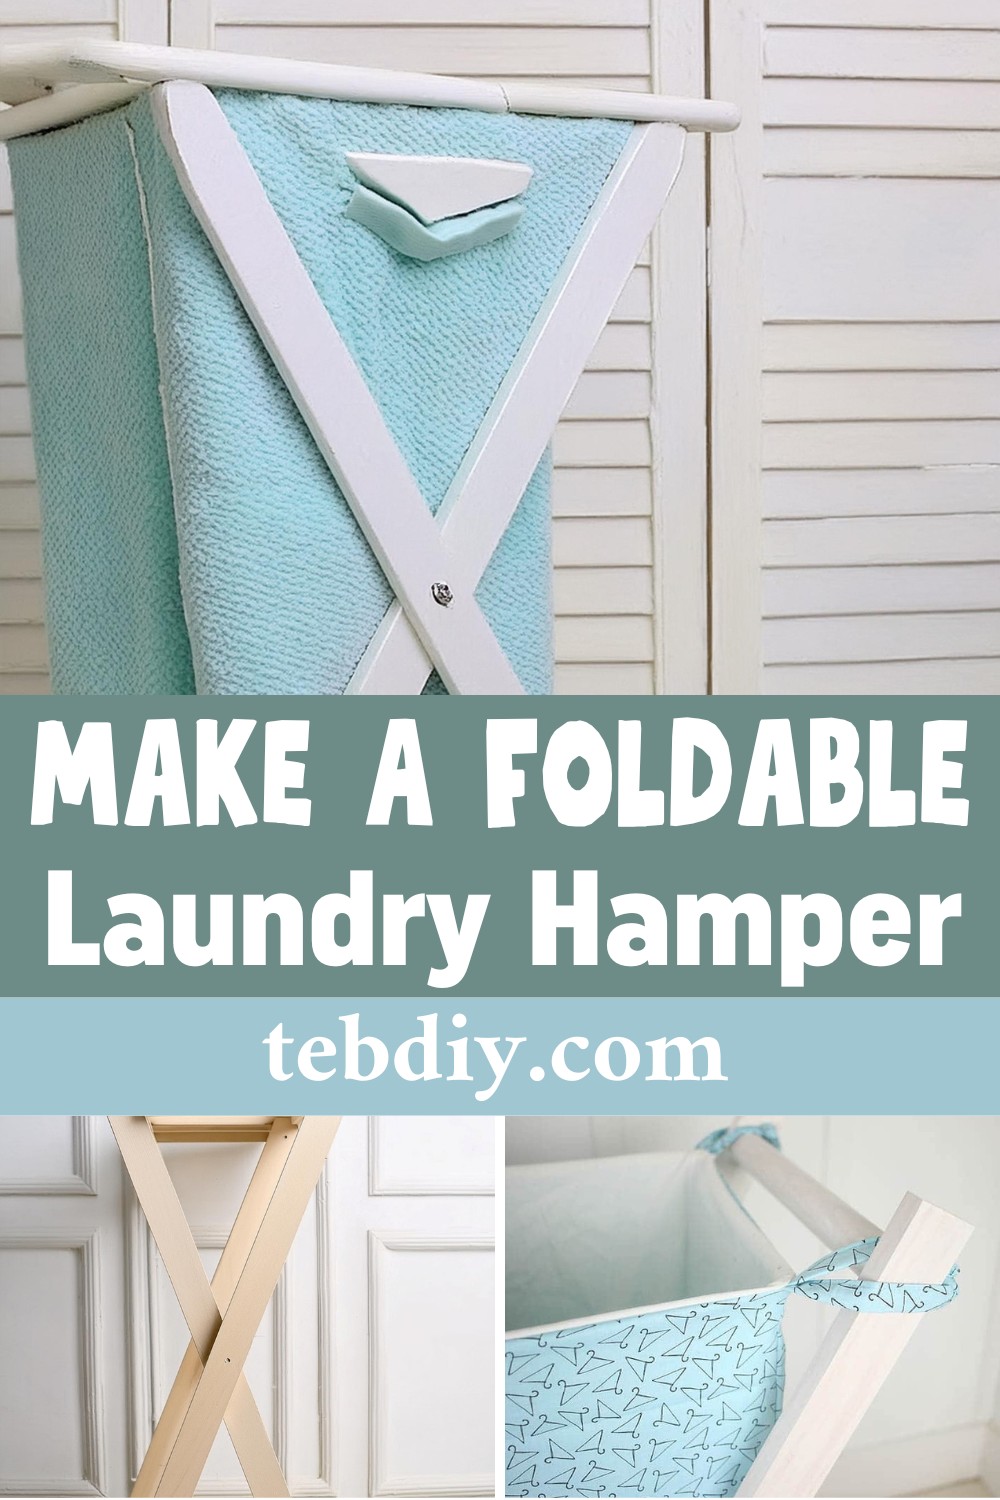 How To Make A Foldable Laundry Hamper